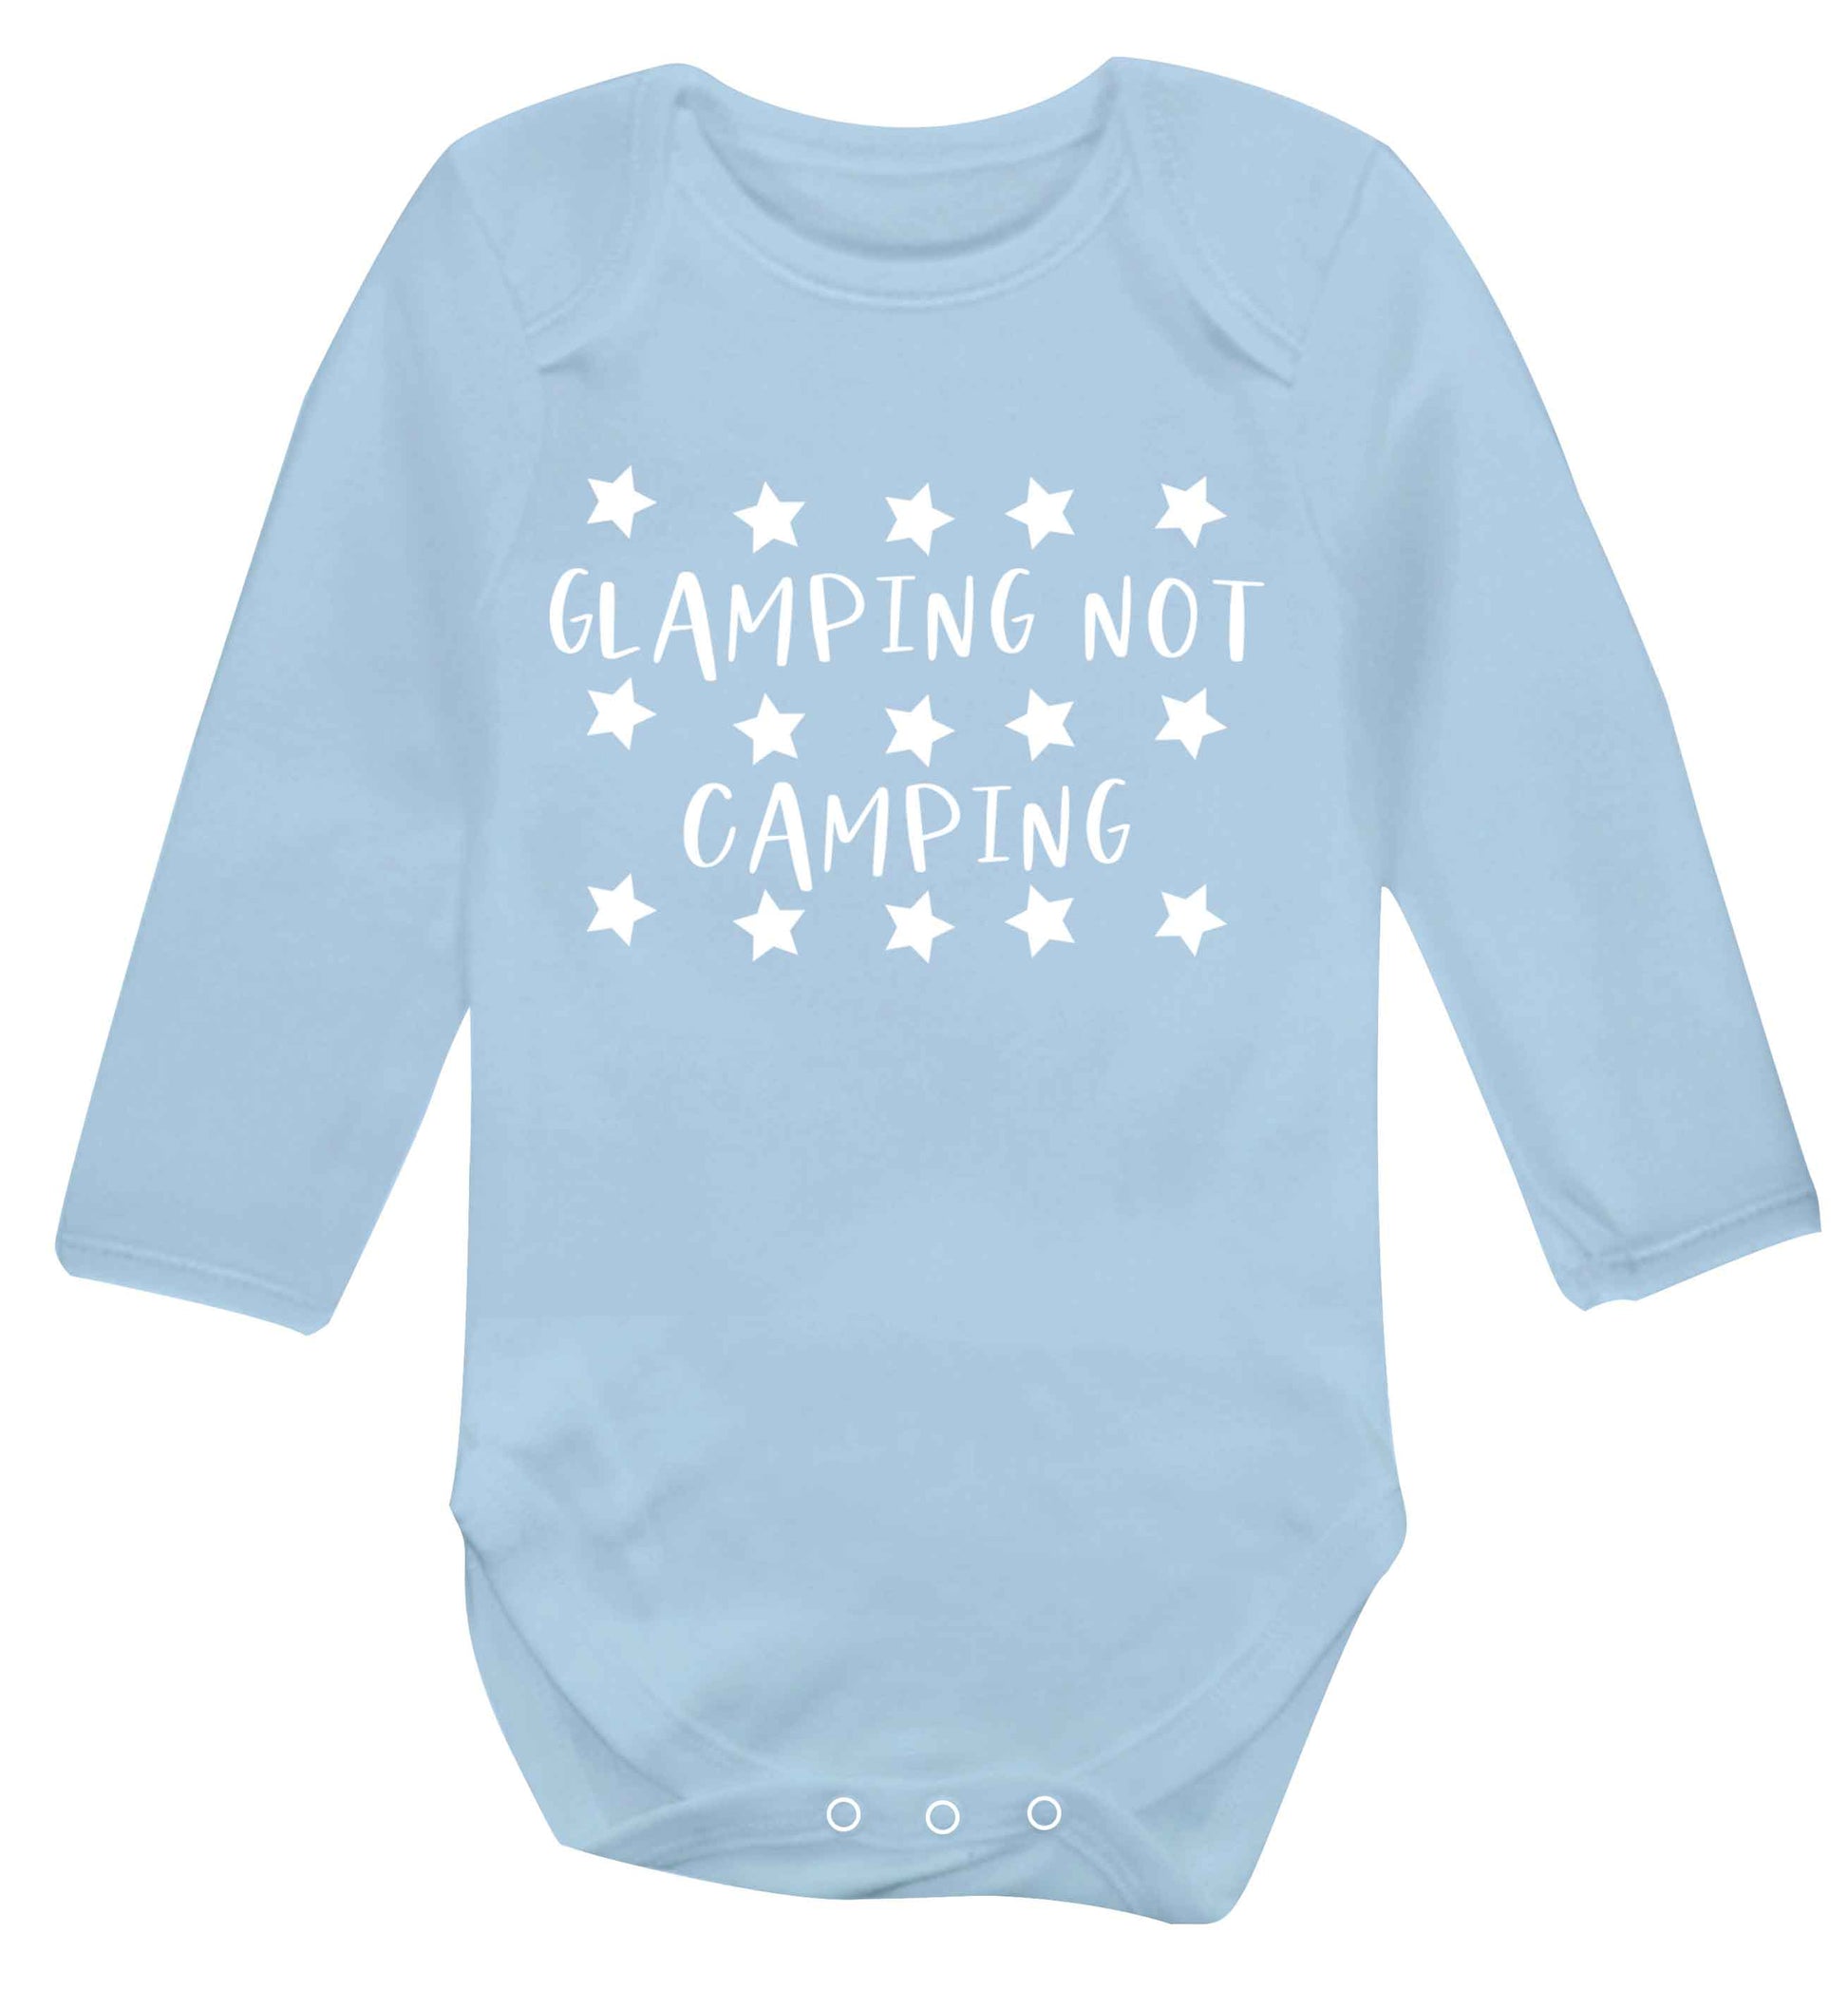 Glamping not camping Baby Vest long sleeved pale blue 6-12 months